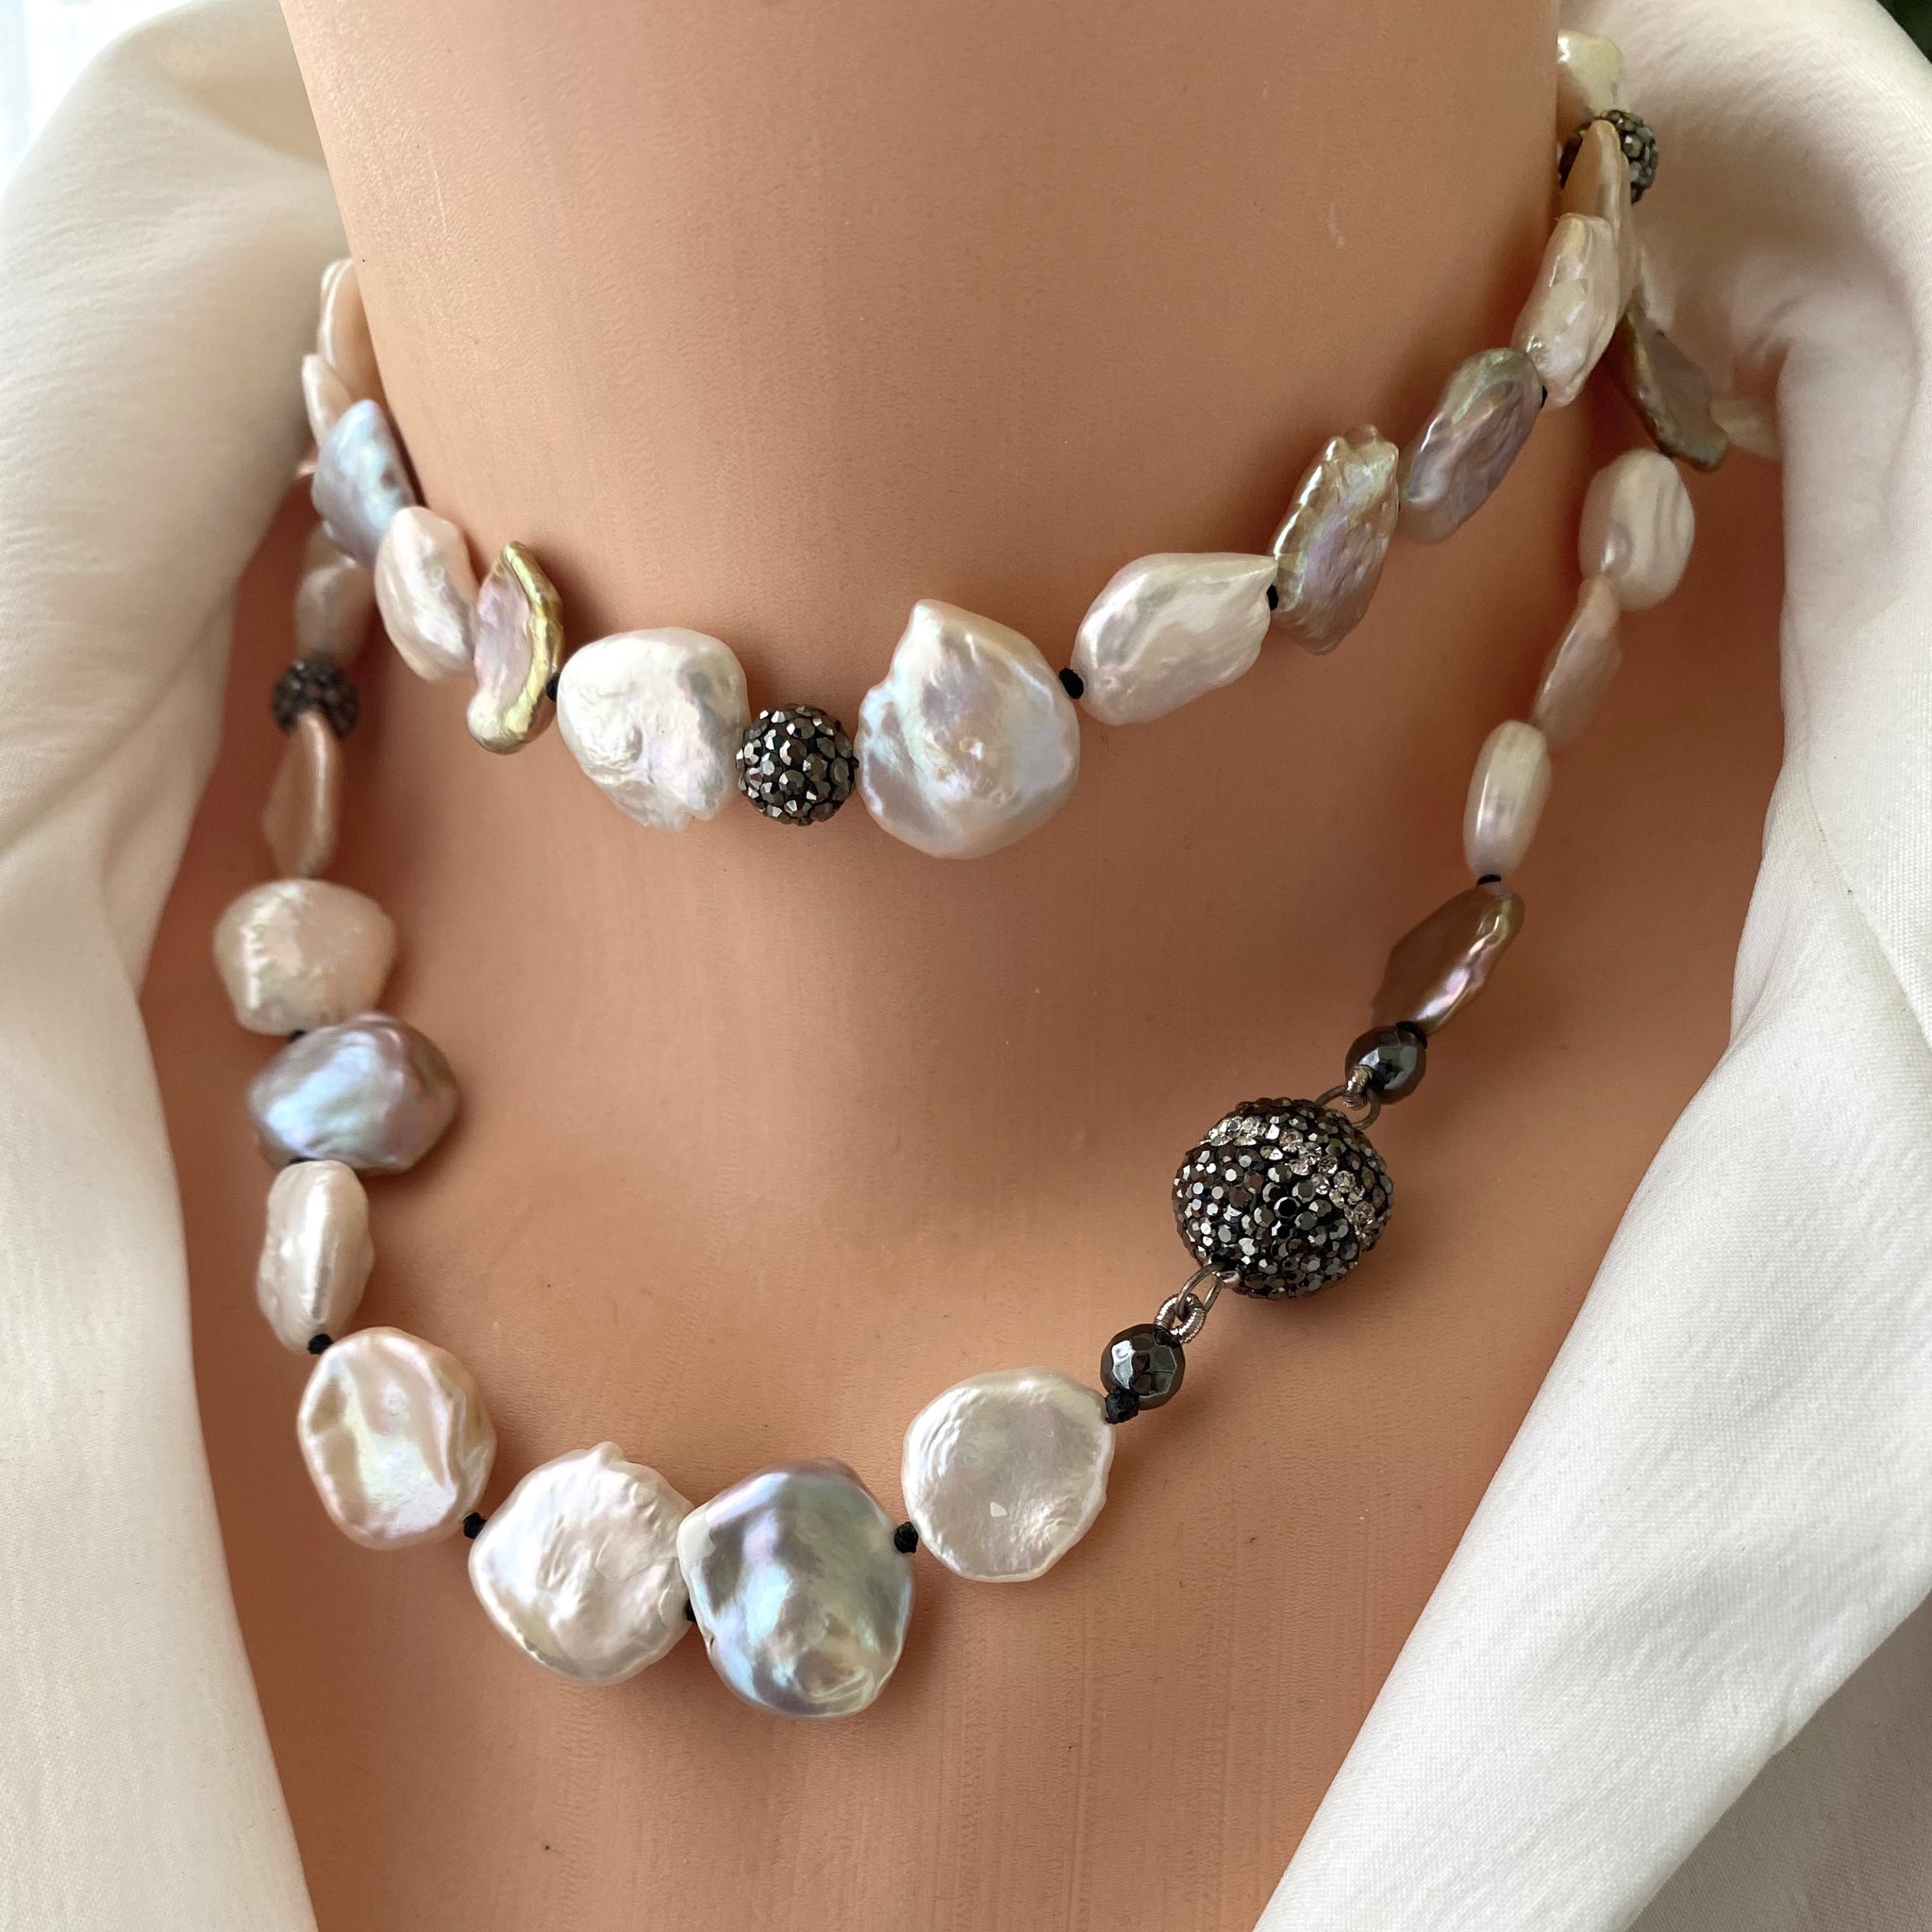 Pearls Design | Pearl Necklace Price | Beads Types